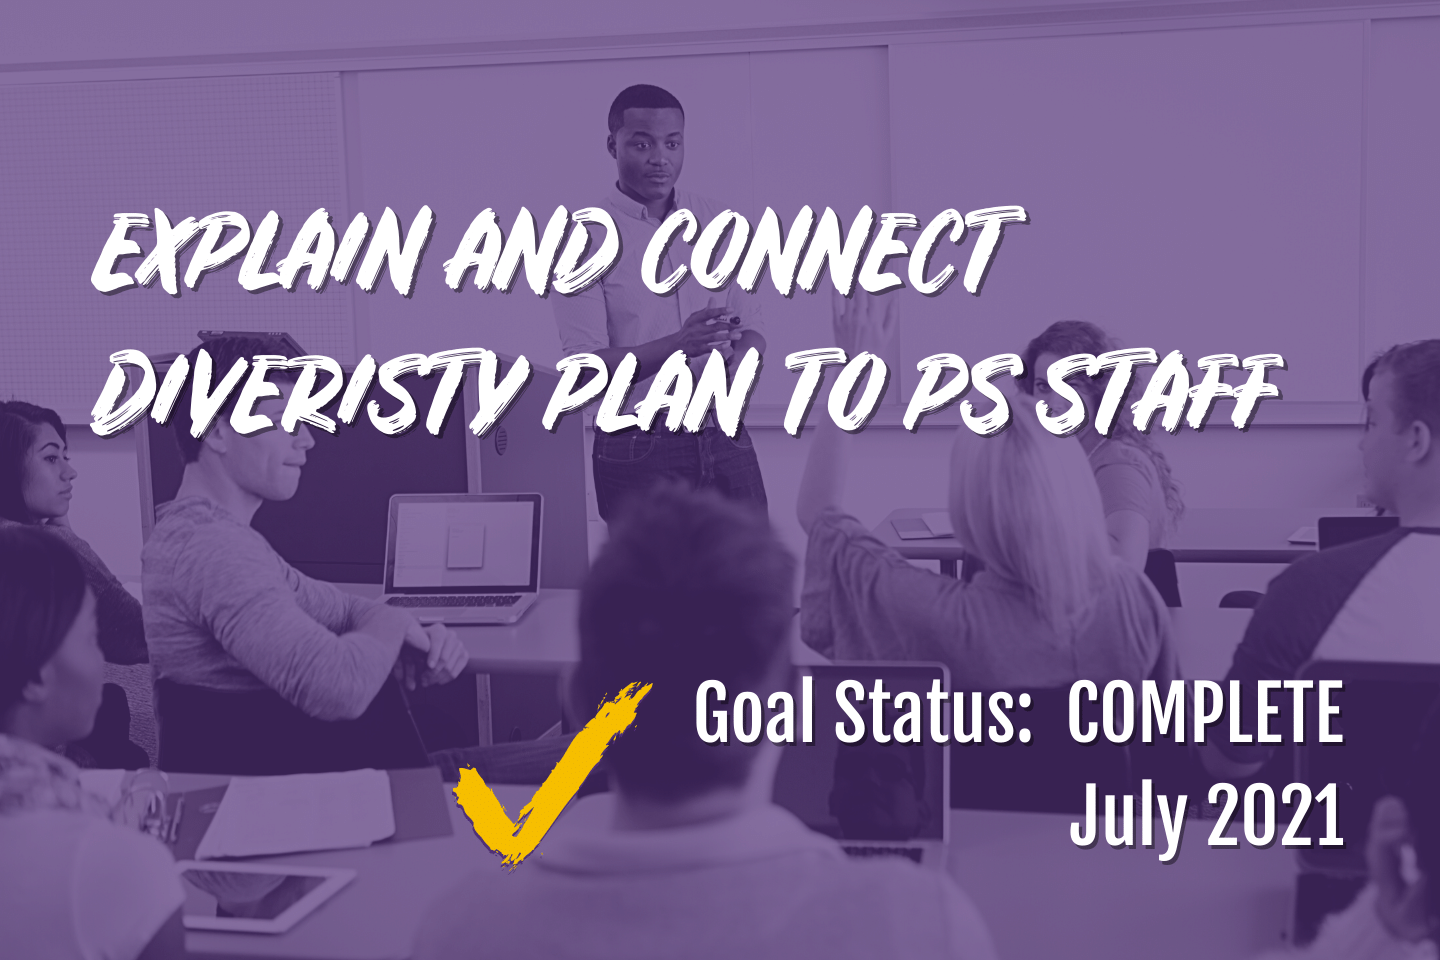 Explain and connect diversity plan to PS staff